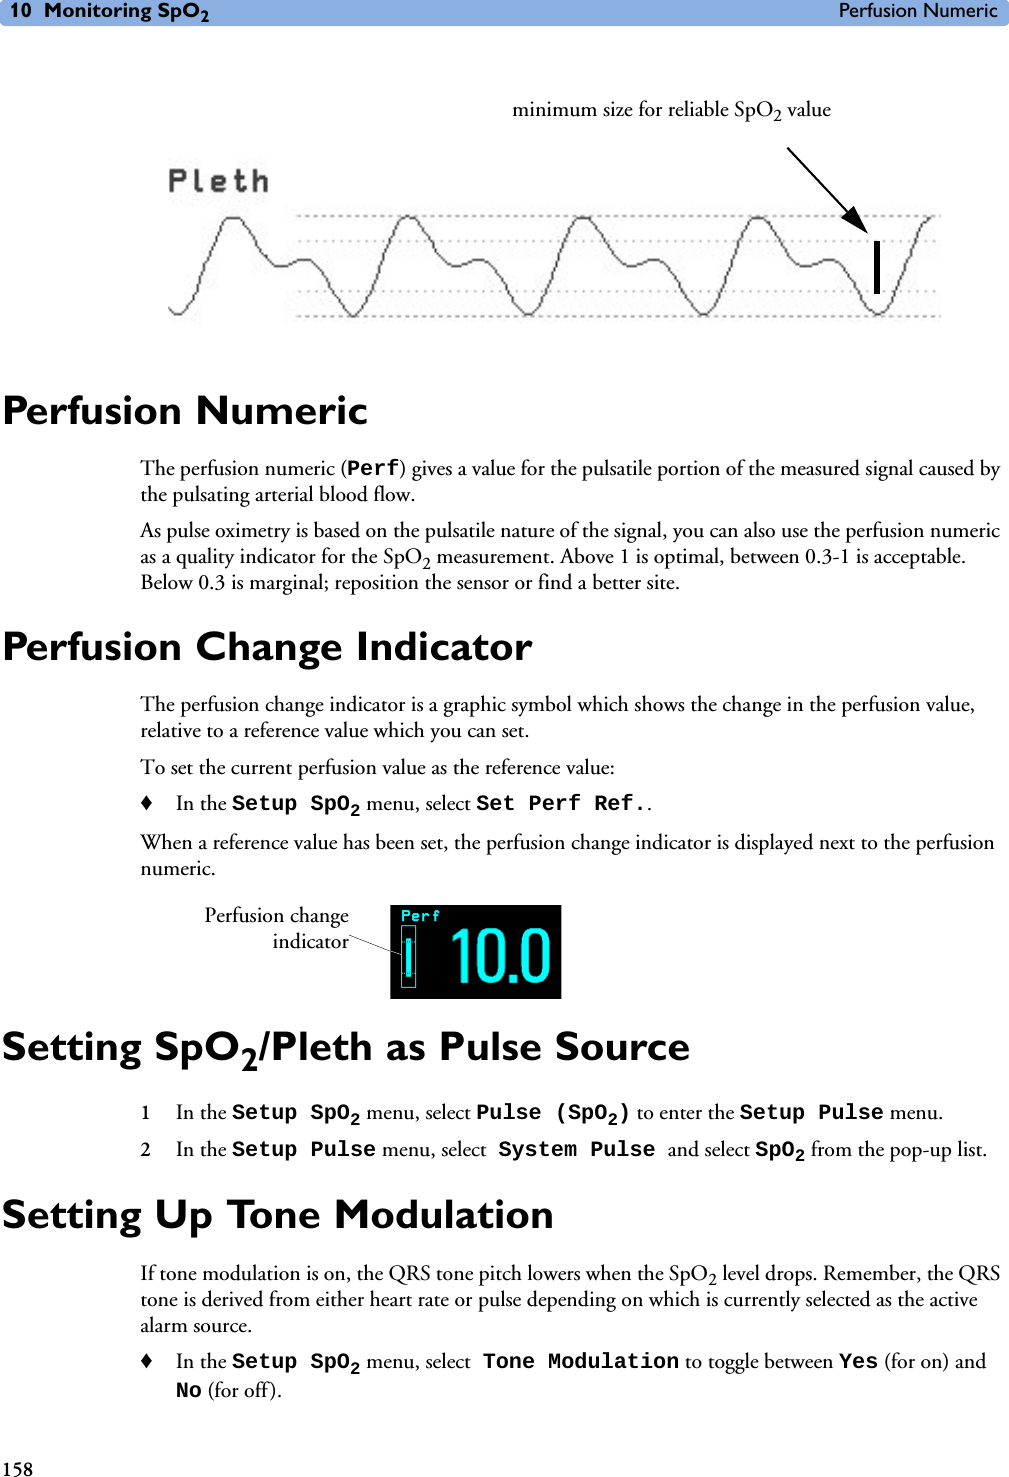 10 Monitoring SpO2Perfusion Numeric158 Perfusion NumericThe perfusion numeric (Perf) gives a value for the pulsatile portion of the measured signal caused by the pulsating arterial blood flow.As pulse oximetry is based on the pulsatile nature of the signal, you can also use the perfusion numeric as a quality indicator for the SpO2 measurement. Above 1 is optimal, between 0.3-1 is acceptable. Below 0.3 is marginal; reposition the sensor or find a better site.Perfusion Change IndicatorThe perfusion change indicator is a graphic symbol which shows the change in the perfusion value, relative to a reference value which you can set. To set the current perfusion value as the reference value:♦In the Setup SpO2 menu, select Set Perf Ref..When a reference value has been set, the perfusion change indicator is displayed next to the perfusion numeric.Setting SpO2/Pleth as Pulse Source1In the Setup SpO2 menu, select Pulse (SpO2) to enter the Setup Pulse menu.2In the Setup Pulse menu, select System Pulse and select SpO2 from the pop-up list.Setting Up Tone ModulationIf tone modulation is on, the QRS tone pitch lowers when the SpO2 level drops. Remember, the QRS tone is derived from either heart rate or pulse depending on which is currently selected as the active alarm source. ♦In the Setup SpO2 menu, select Tone Modulation to toggle between Yes (for on) and No (for off).minimum size for reliable SpO2 valuePerfusion changeindicator